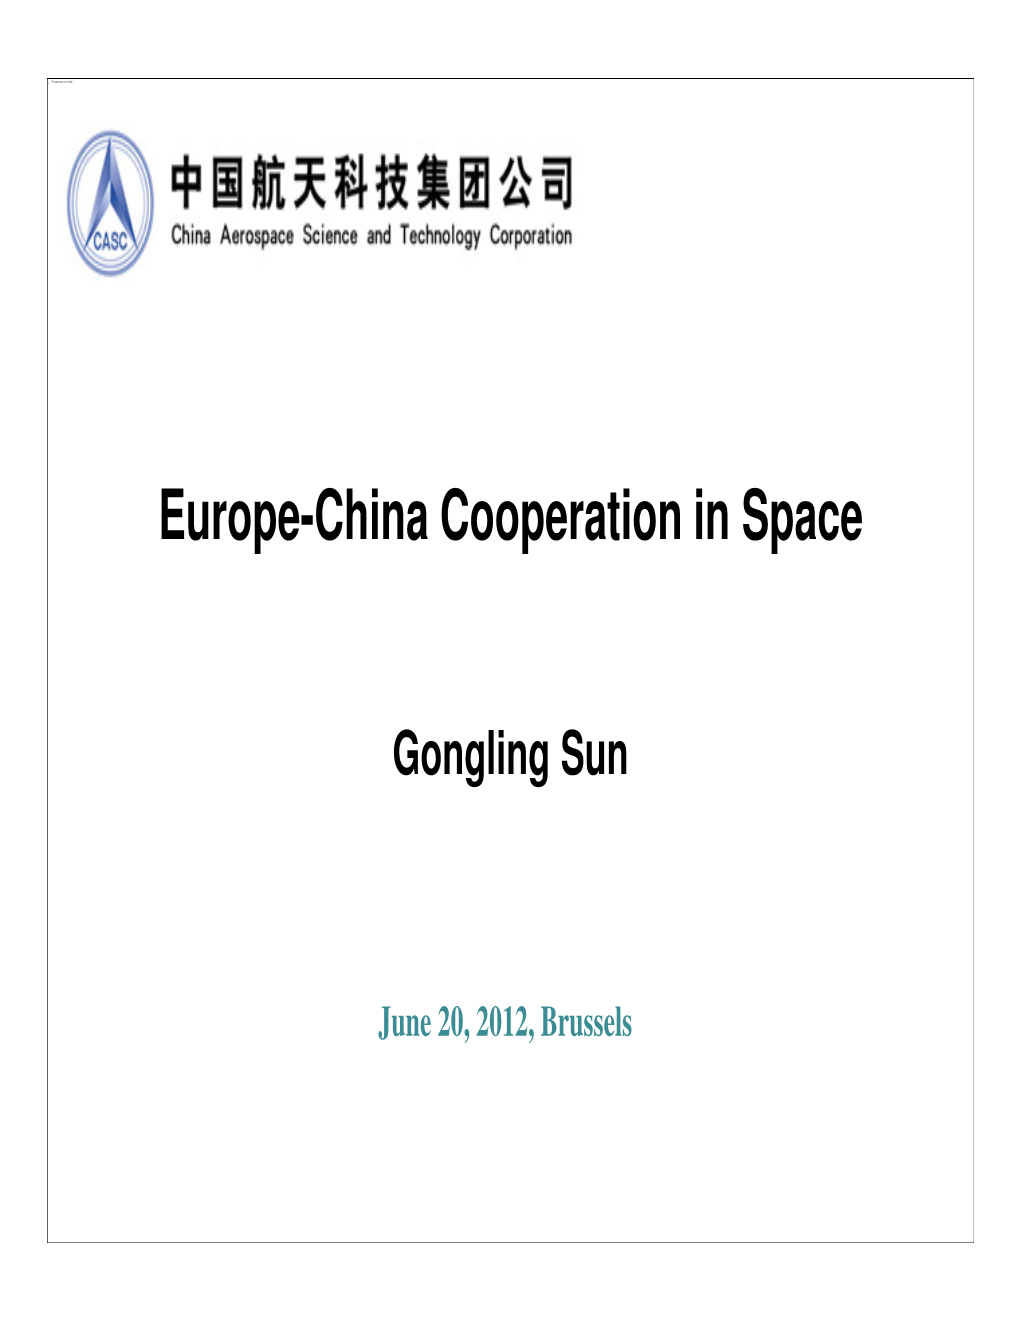 Europe-China Cooperation in Space